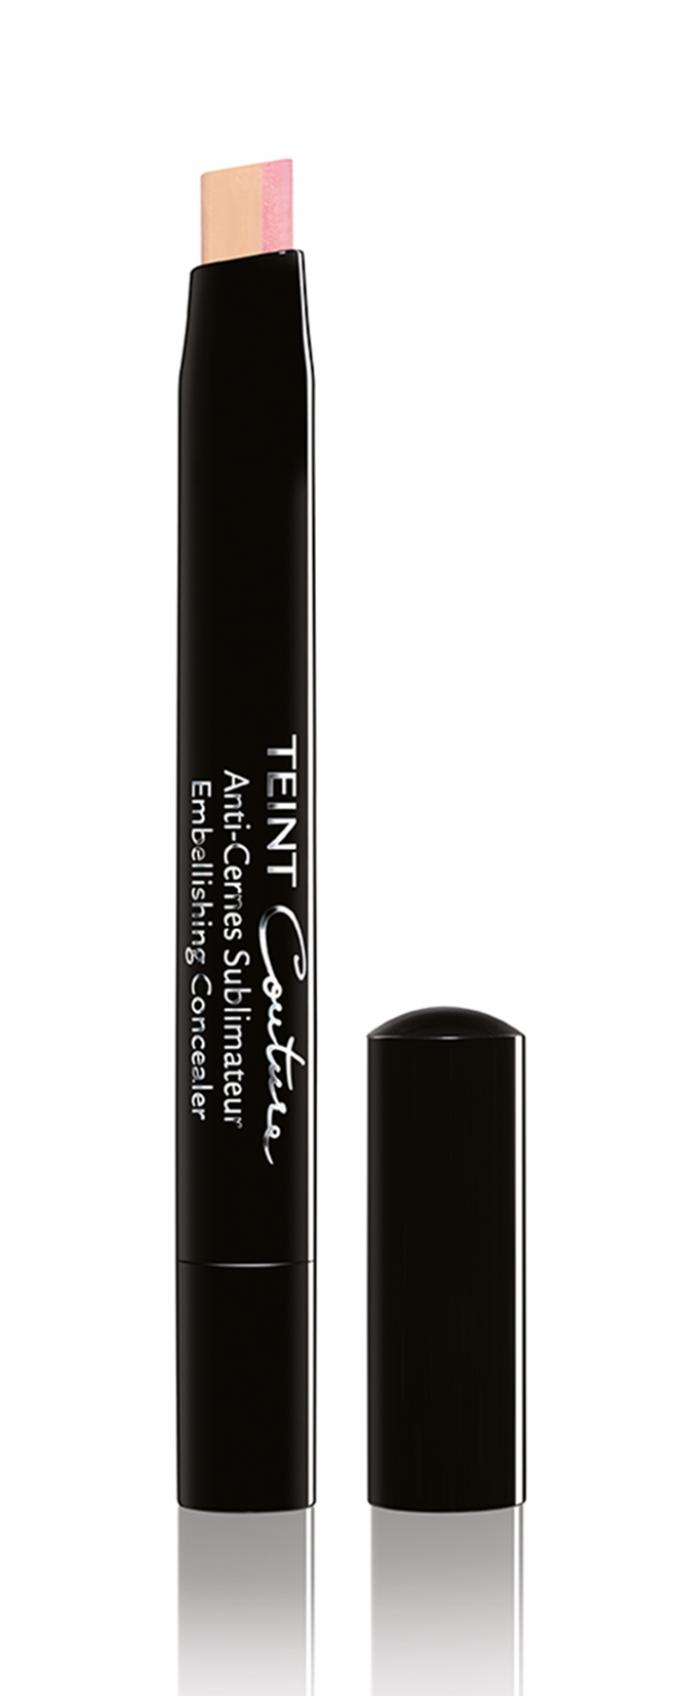 Strobing: Teint Couture concealer (Givenchy)